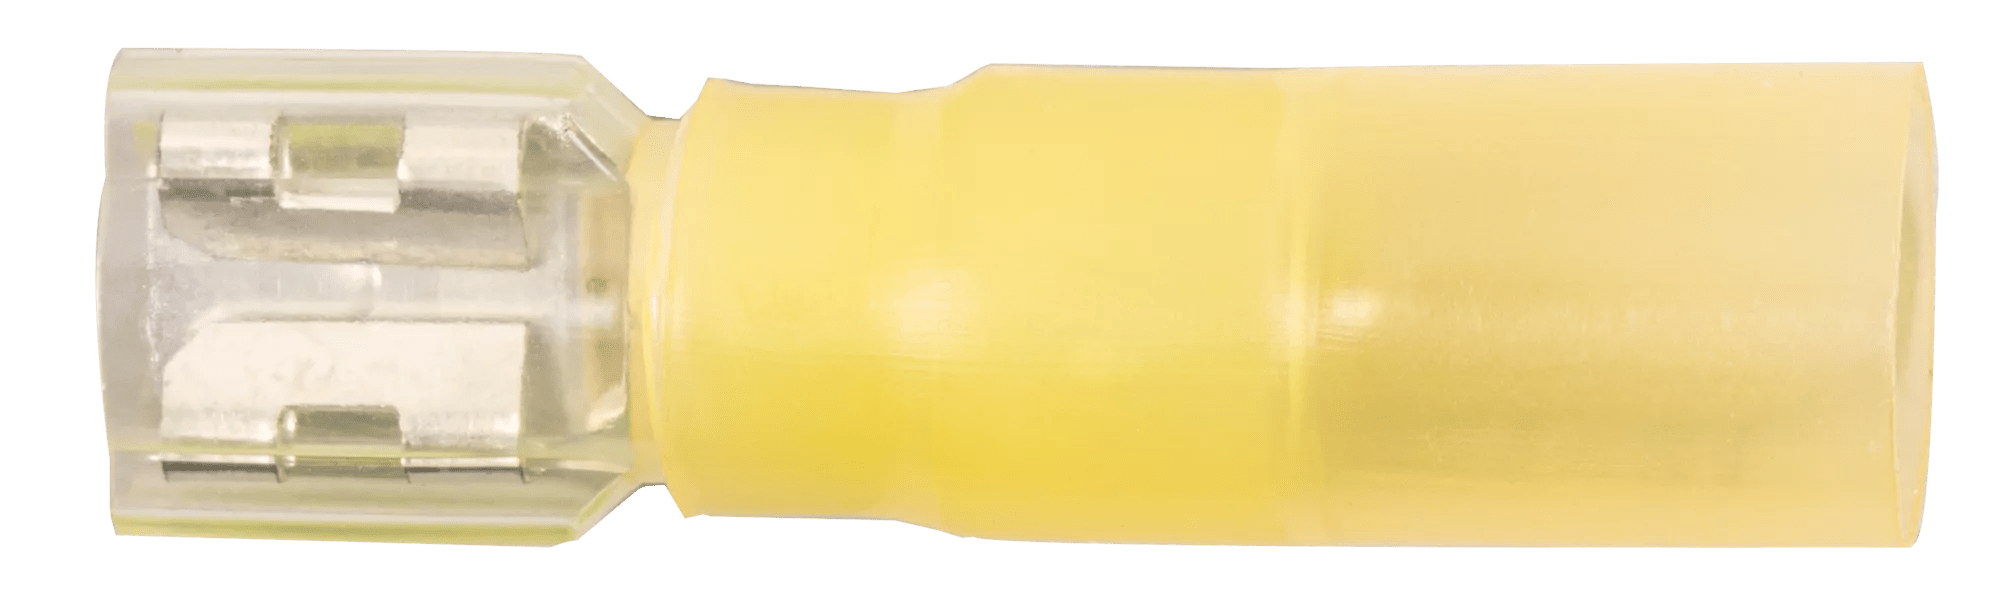 12 - 10 AWG Yellow Polyolefin Fully Insulated Pro-Tech™ Commercial Grade Heat Shrink (1/4" Tab) Female Quick Slide Terminal